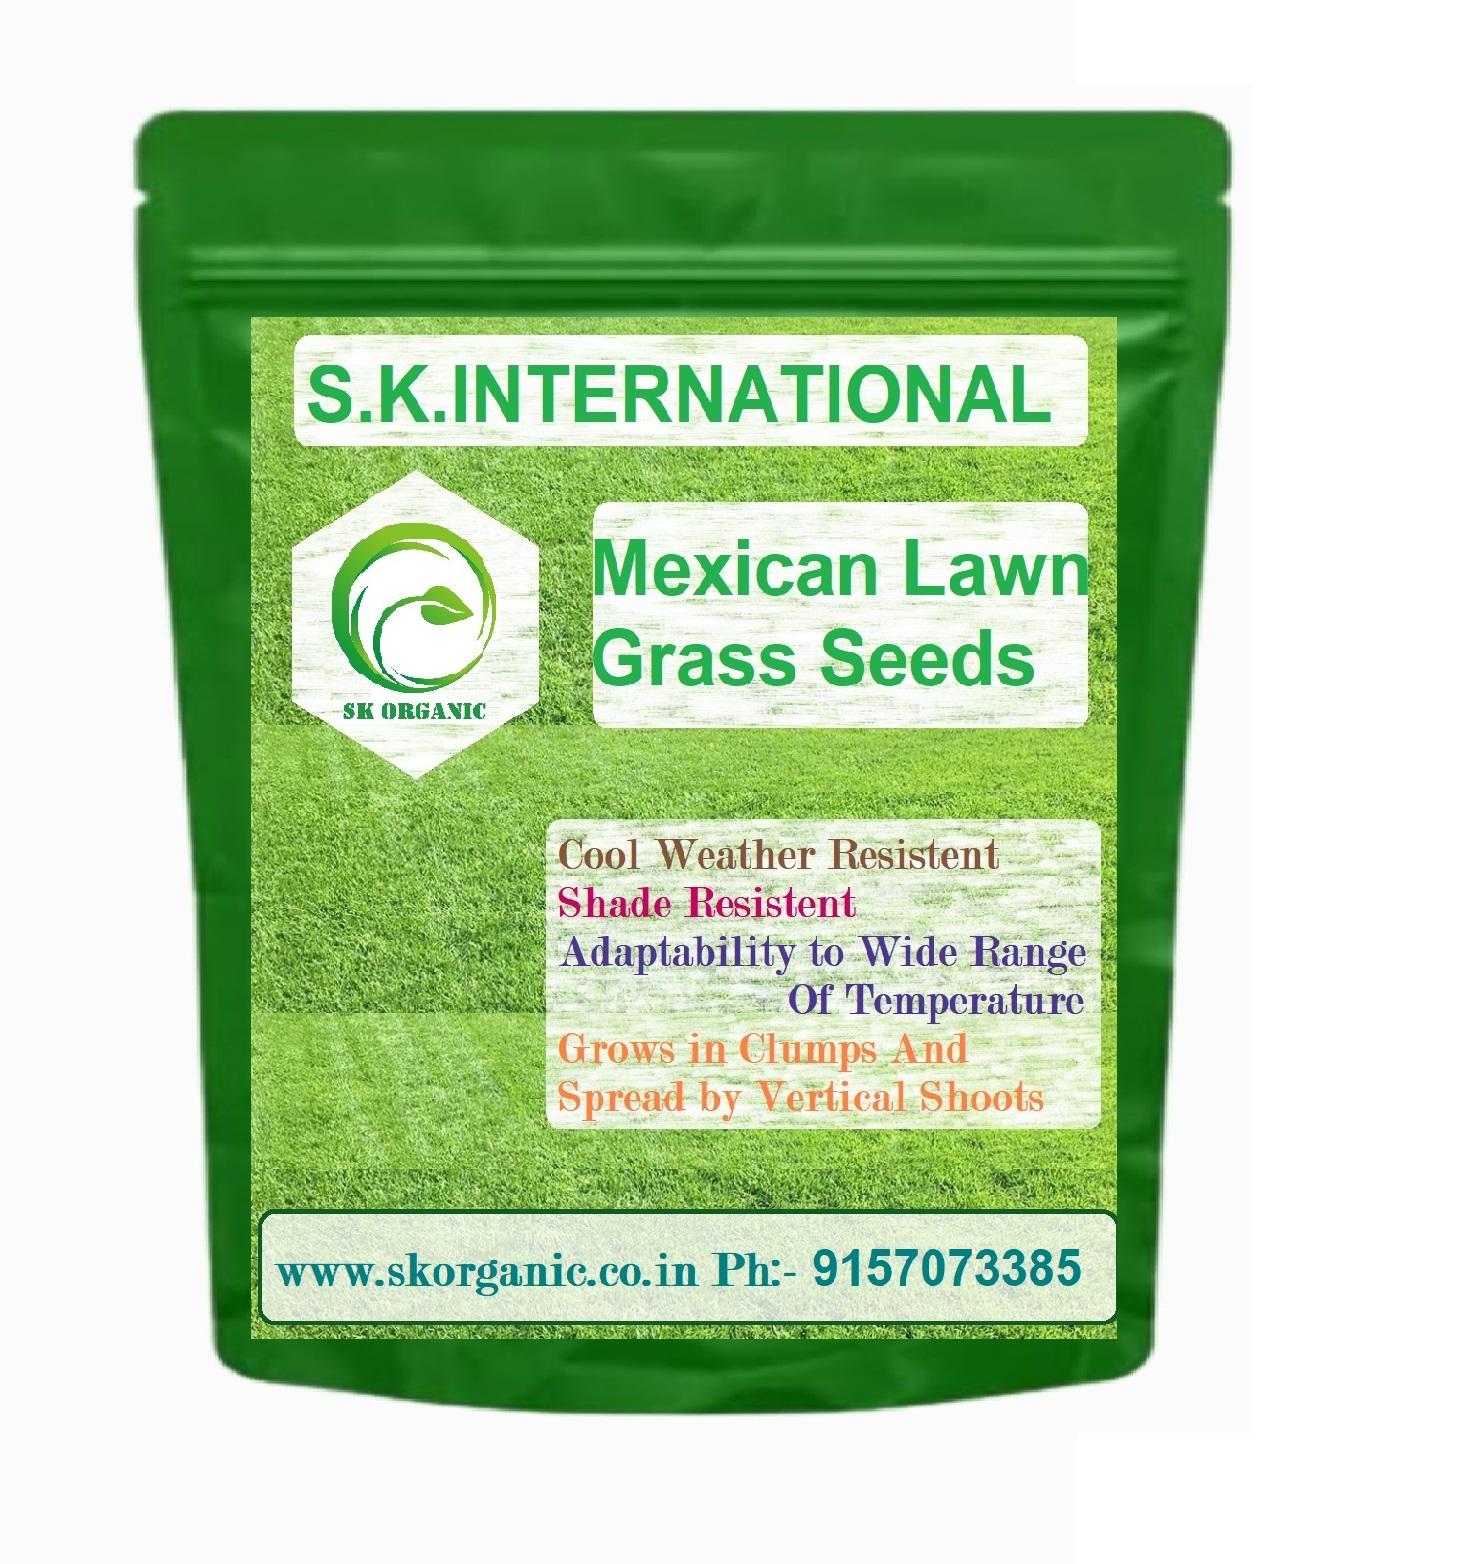 Mexican Lawn Grass Seeds for Home Lawns, Gardens, Farm house, Cold,Drought & Shade Tolerant, Easy Germination